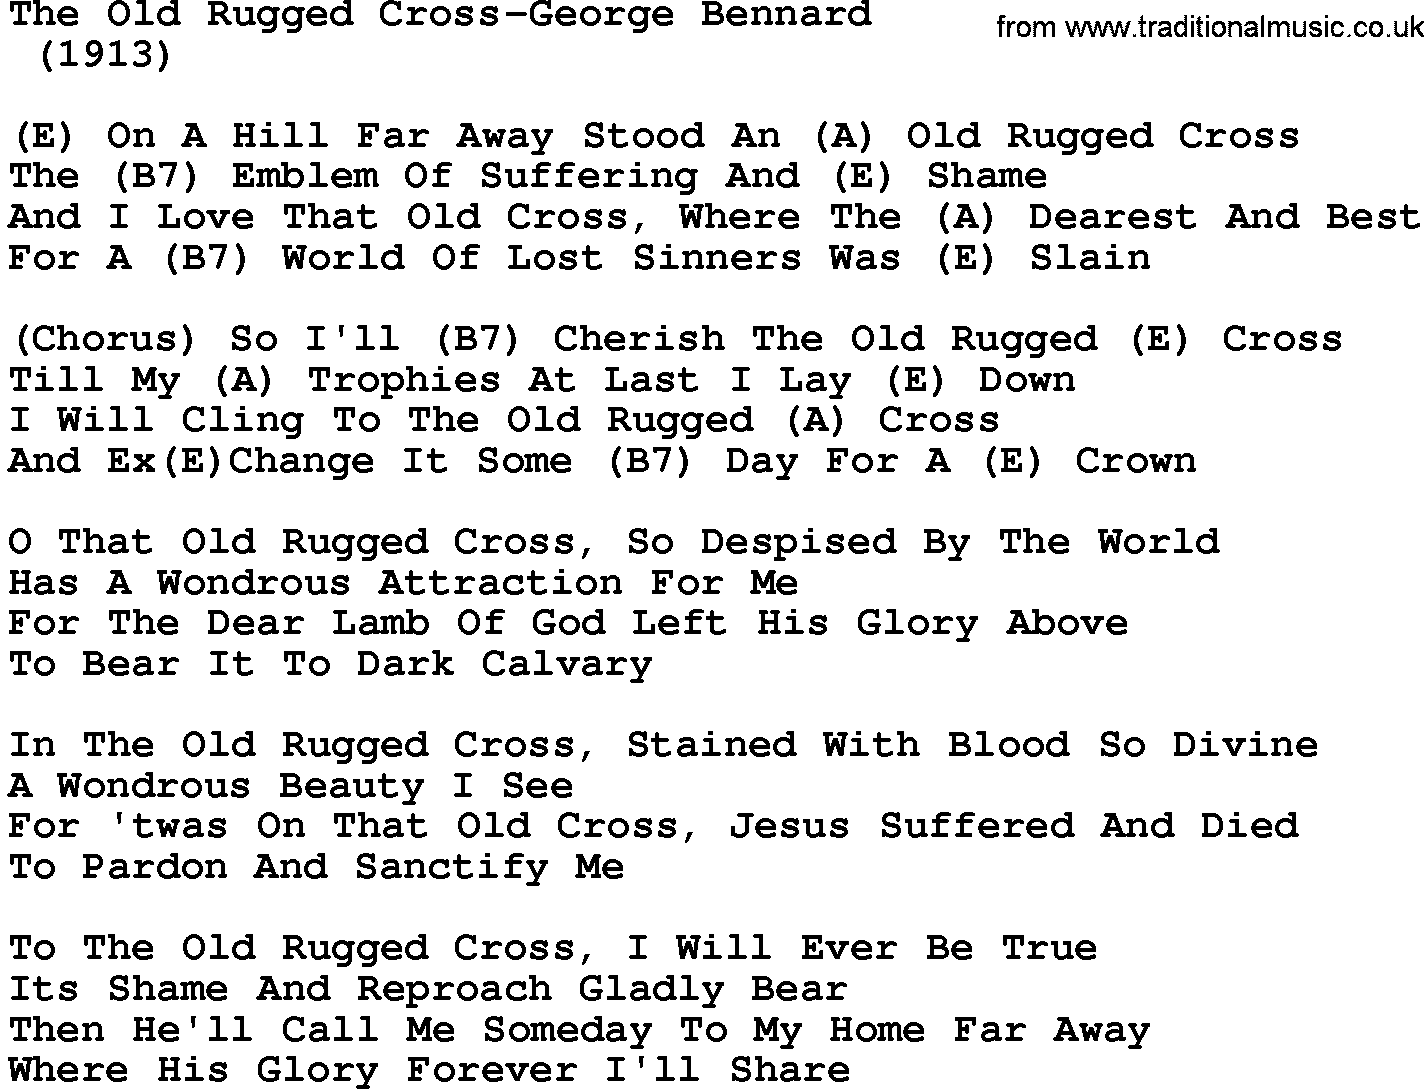 Country music song: The Old Rugged Cross-George Bennard lyrics and chords